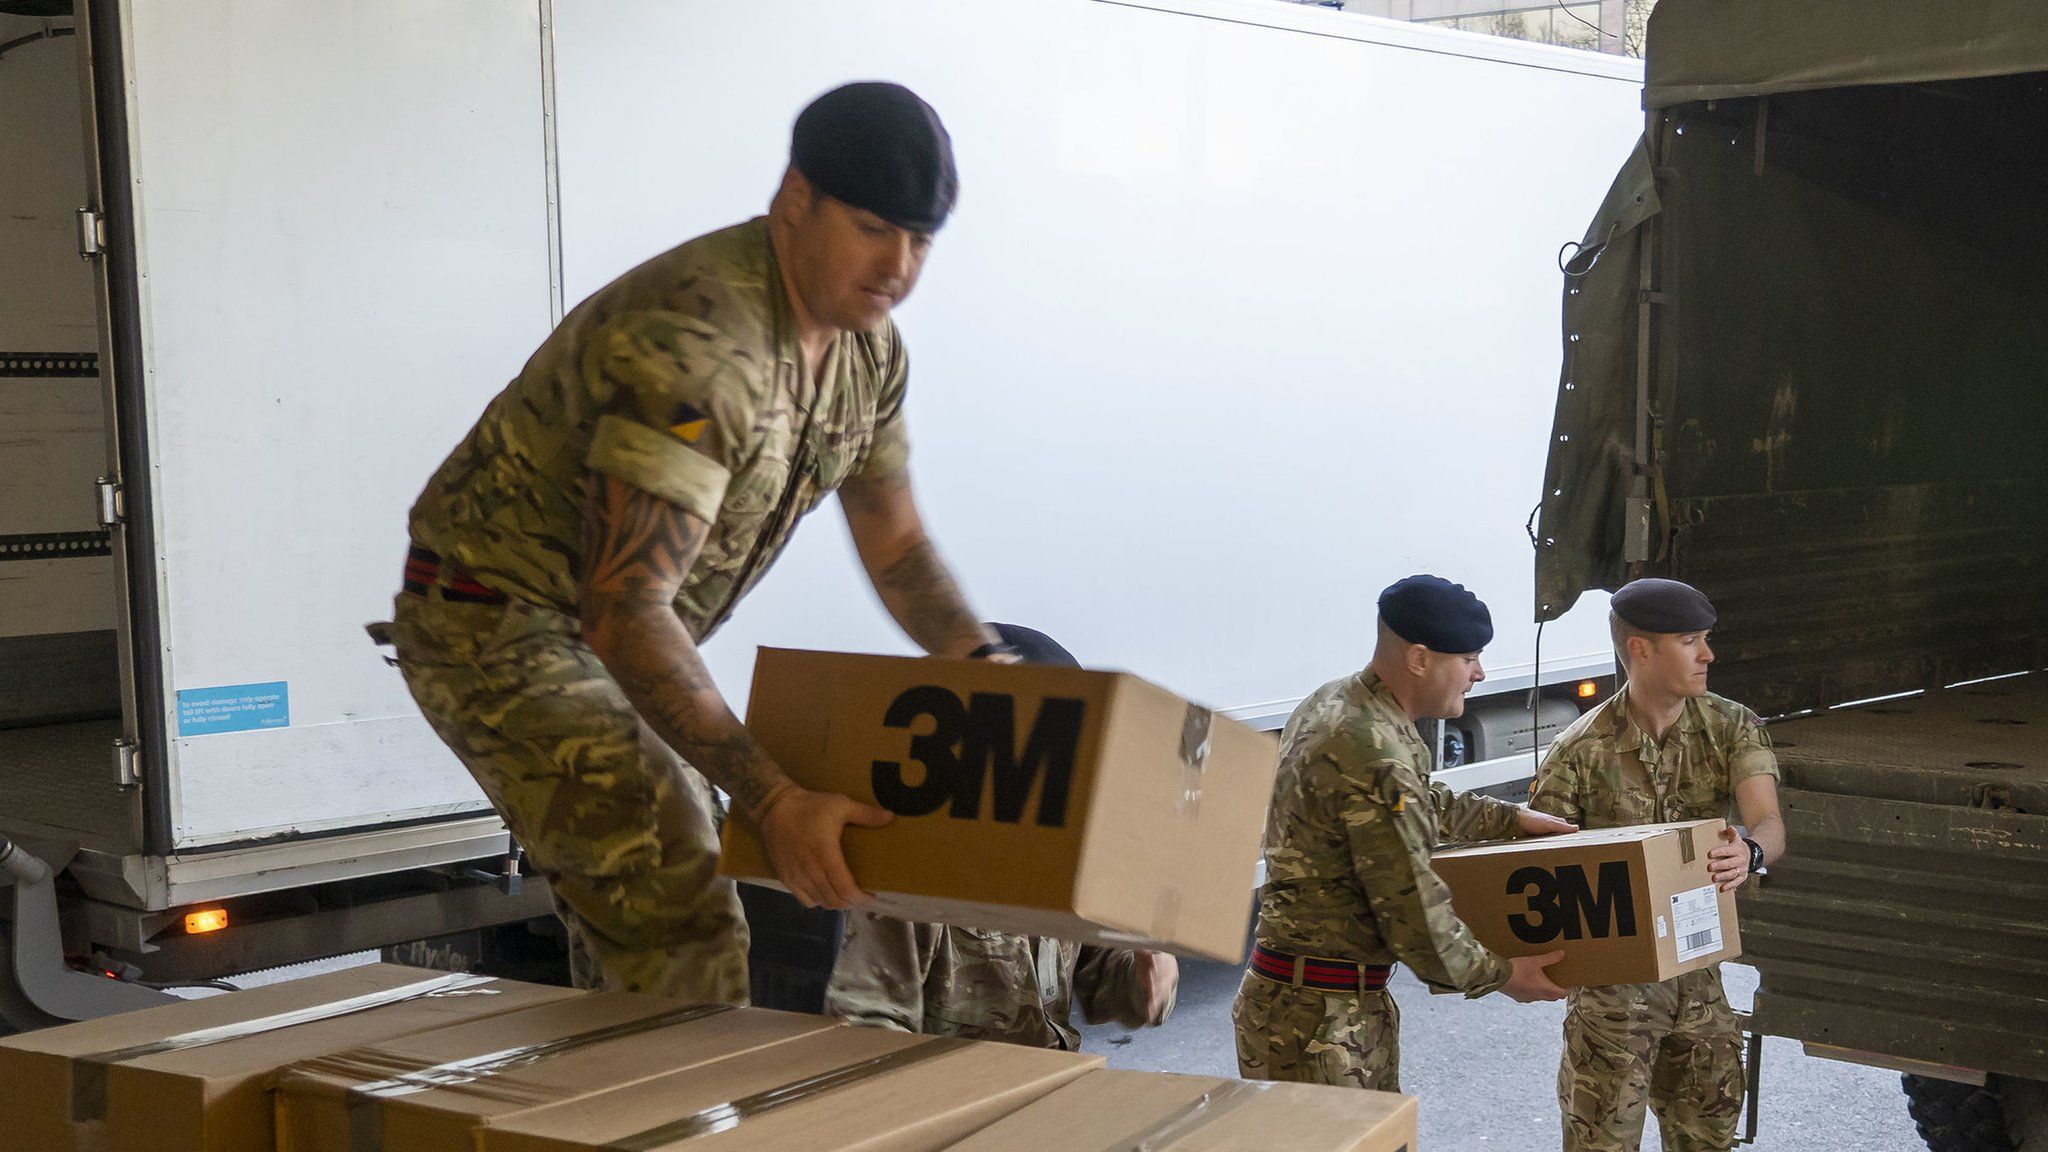 Soldiers with boxes